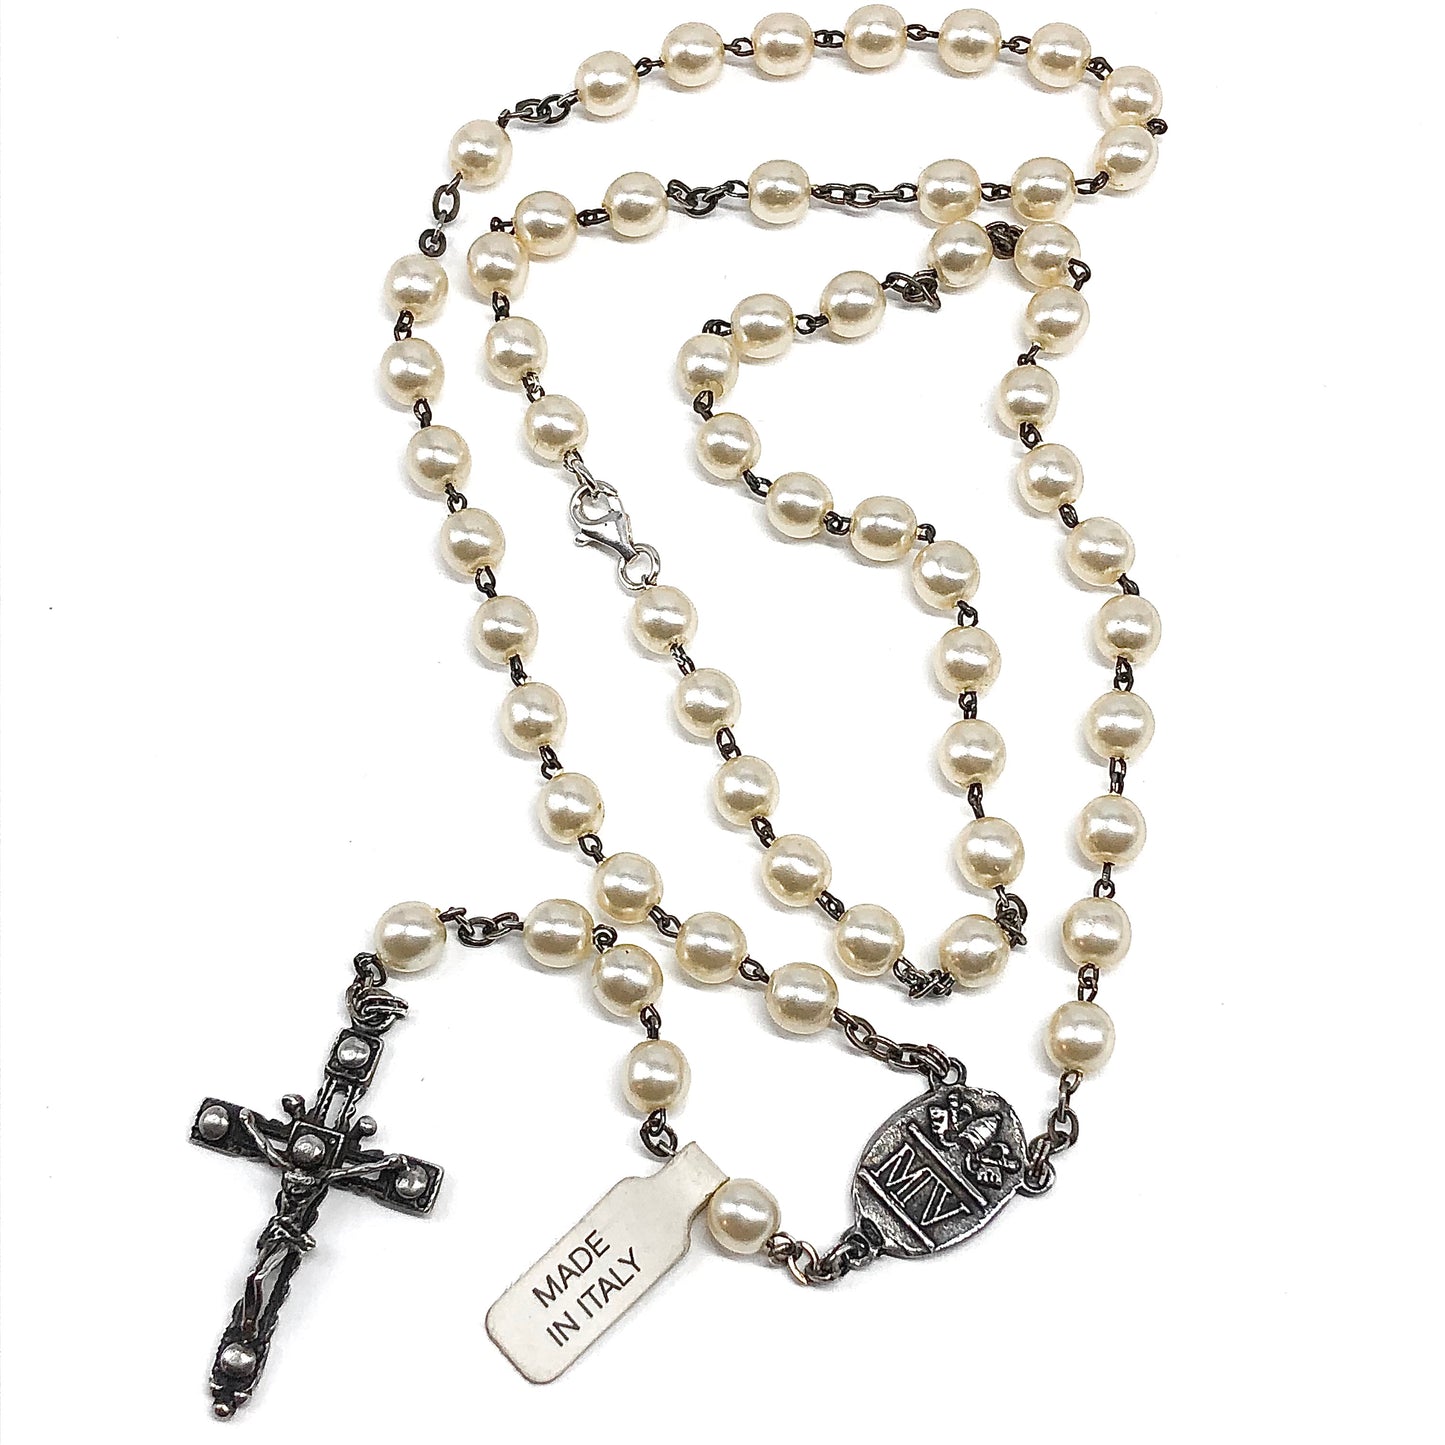 23 inch Sterling Silver White Rosary Bead Style Crucifix Cross Necklace